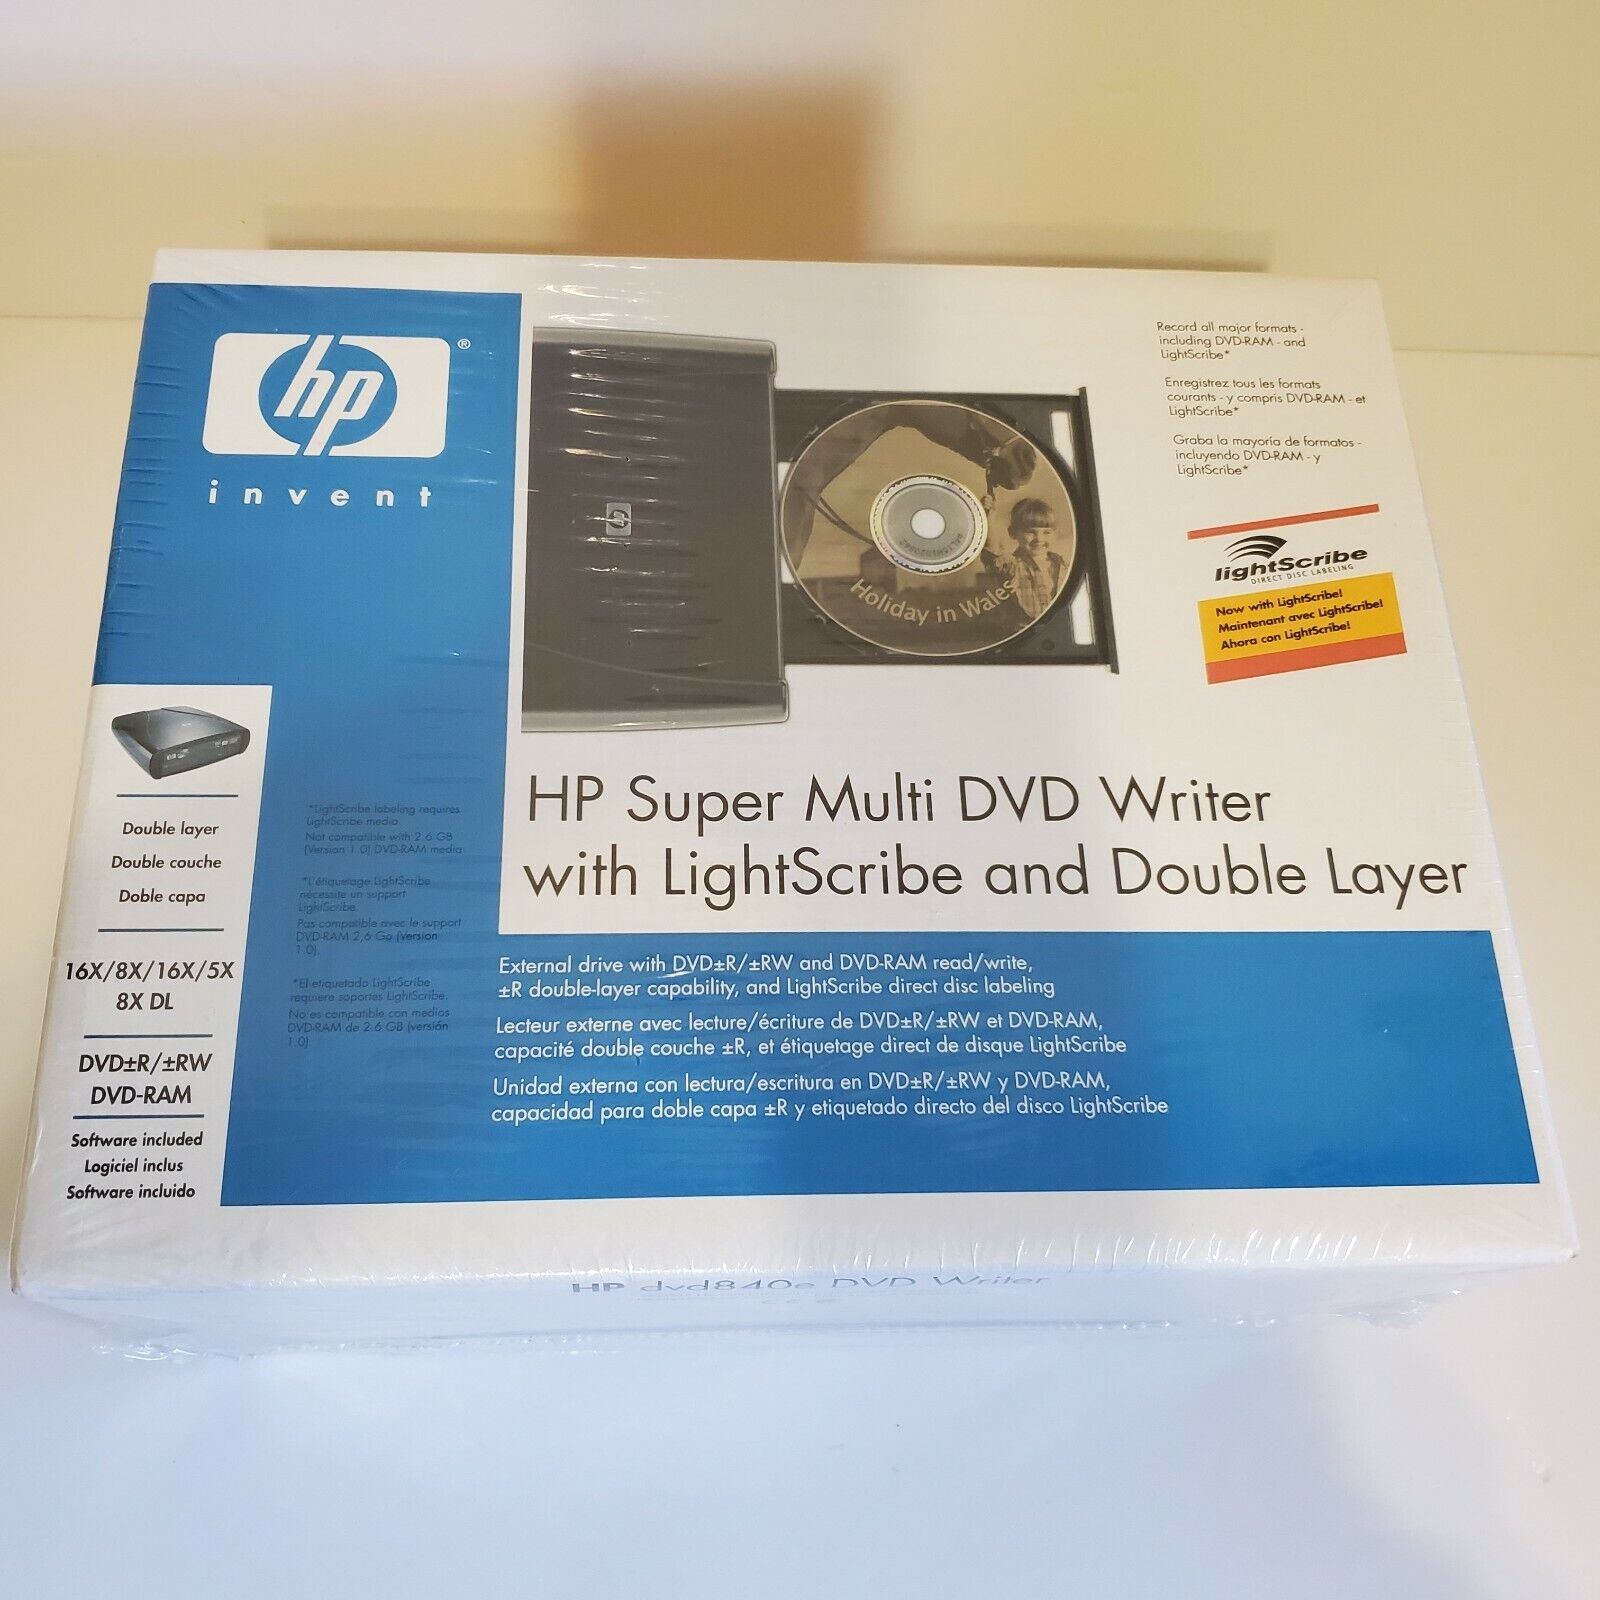 HP dvd840e Super Multi DVD Writer and LightScribe and Double Layer, New in Box